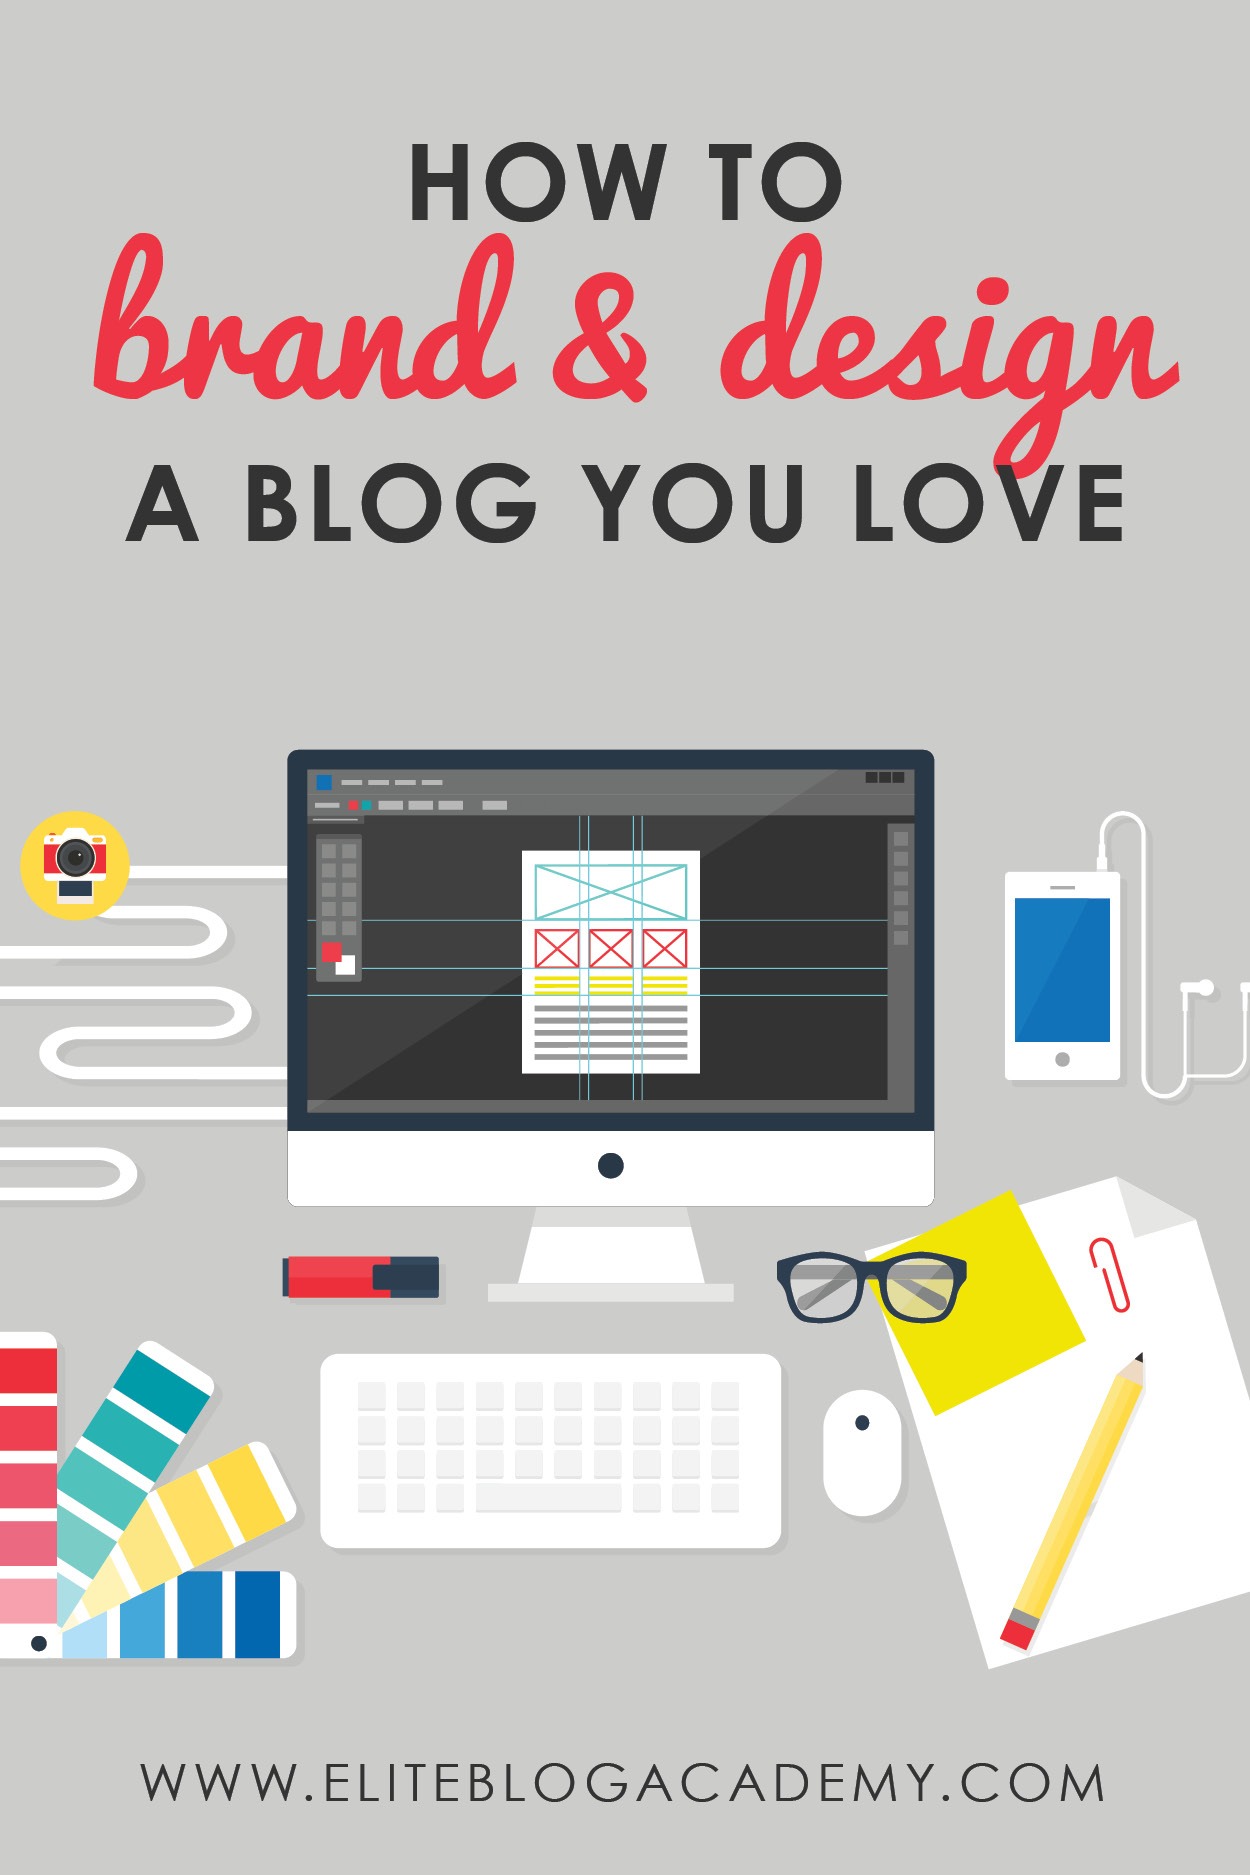 Feeling overwhelmed with your blog & business? Our graphic designers are here to help with 7 steps to help you brand and design a blog you love!